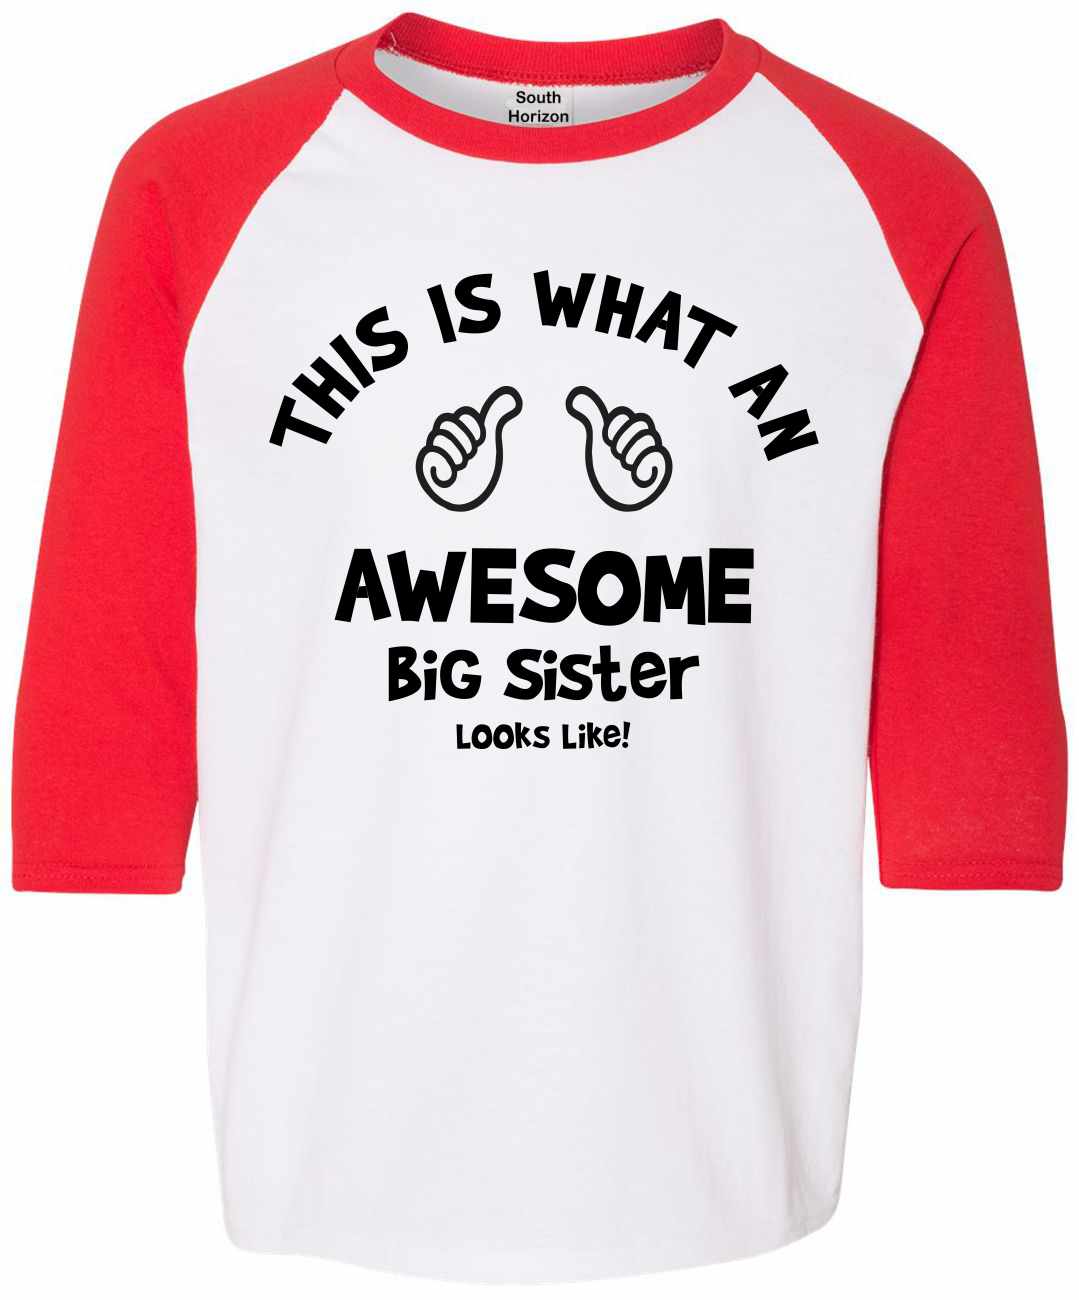 This is What an AWESOME BIG SISTER Looks Like on Youth Baseball Shirt (#969-212)